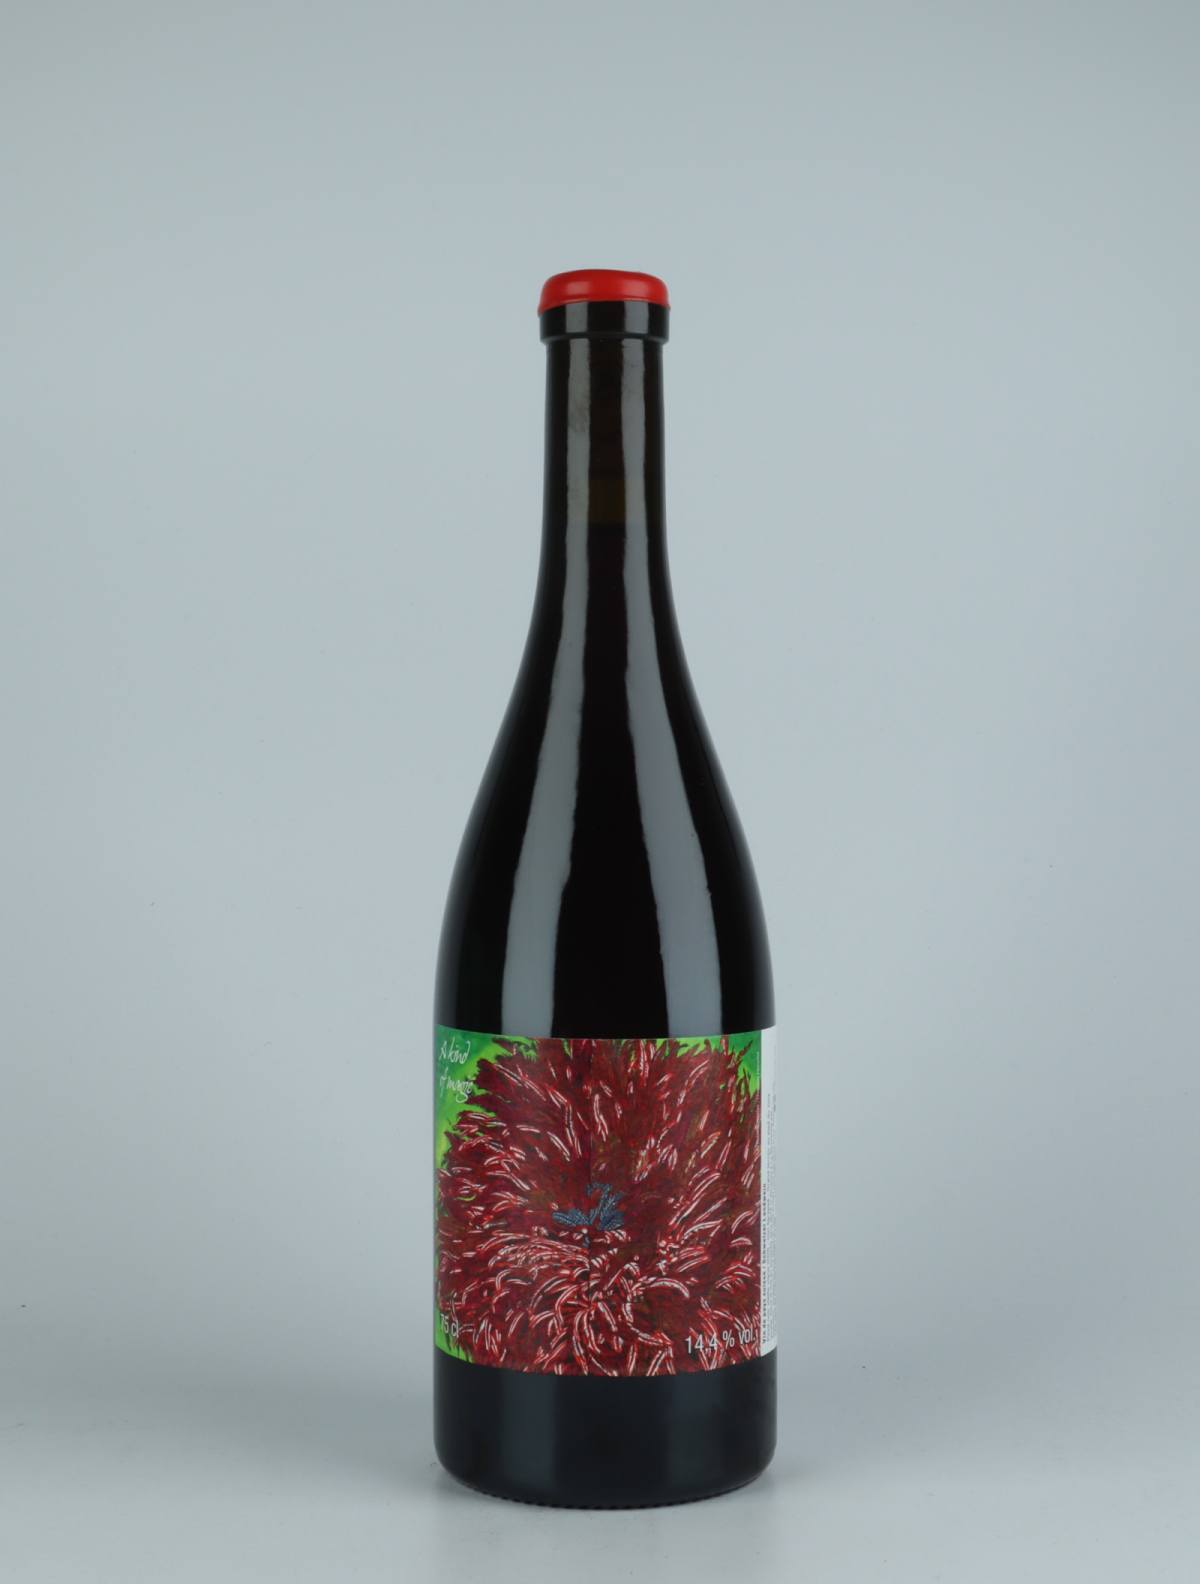 A bottle 2020 A Kind of Magic Red wine from Les Vins du Fab, Neuchâtel in Switzerland